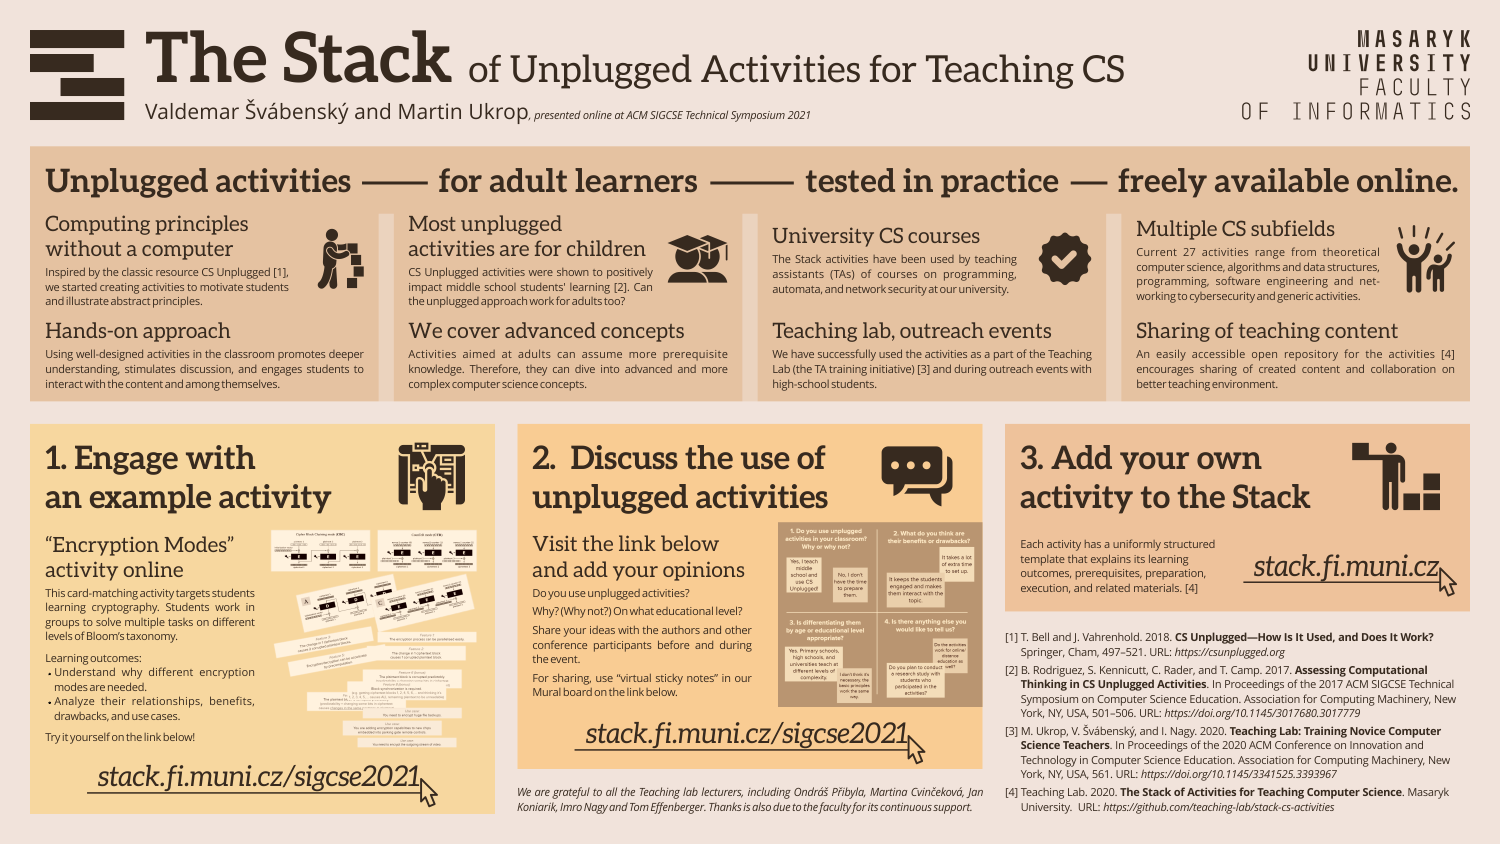 The Stack: Unplugged Activities for Teaching Computer Science